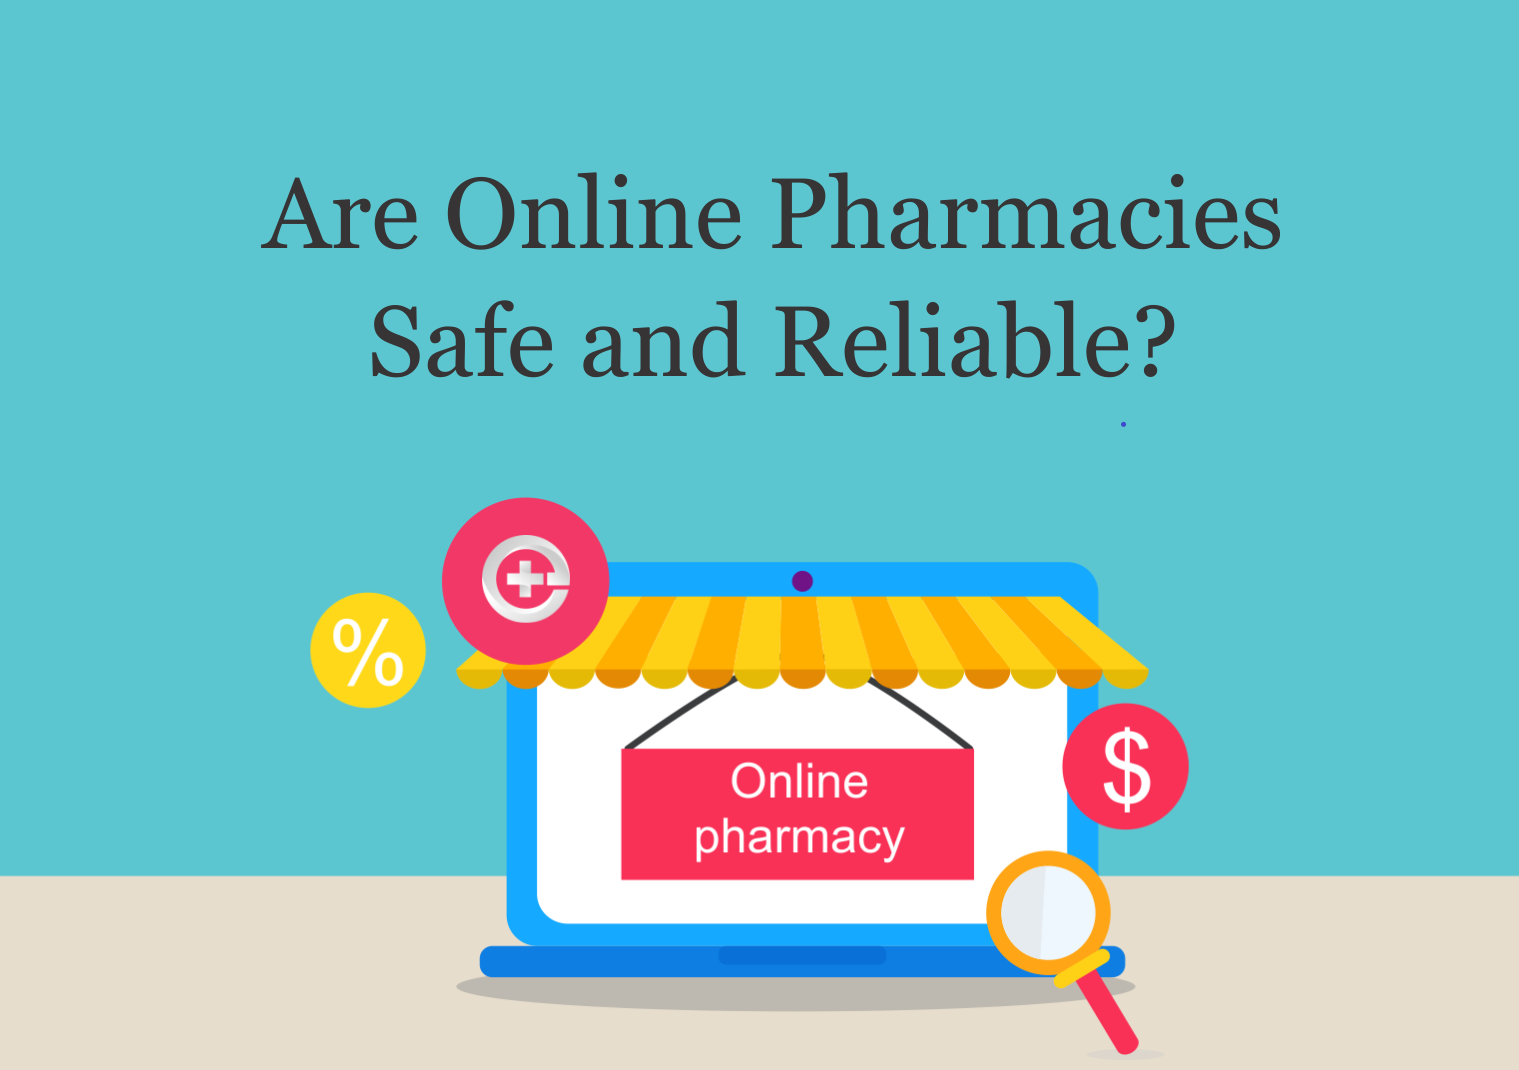 Read this before you go for online pharmacy business